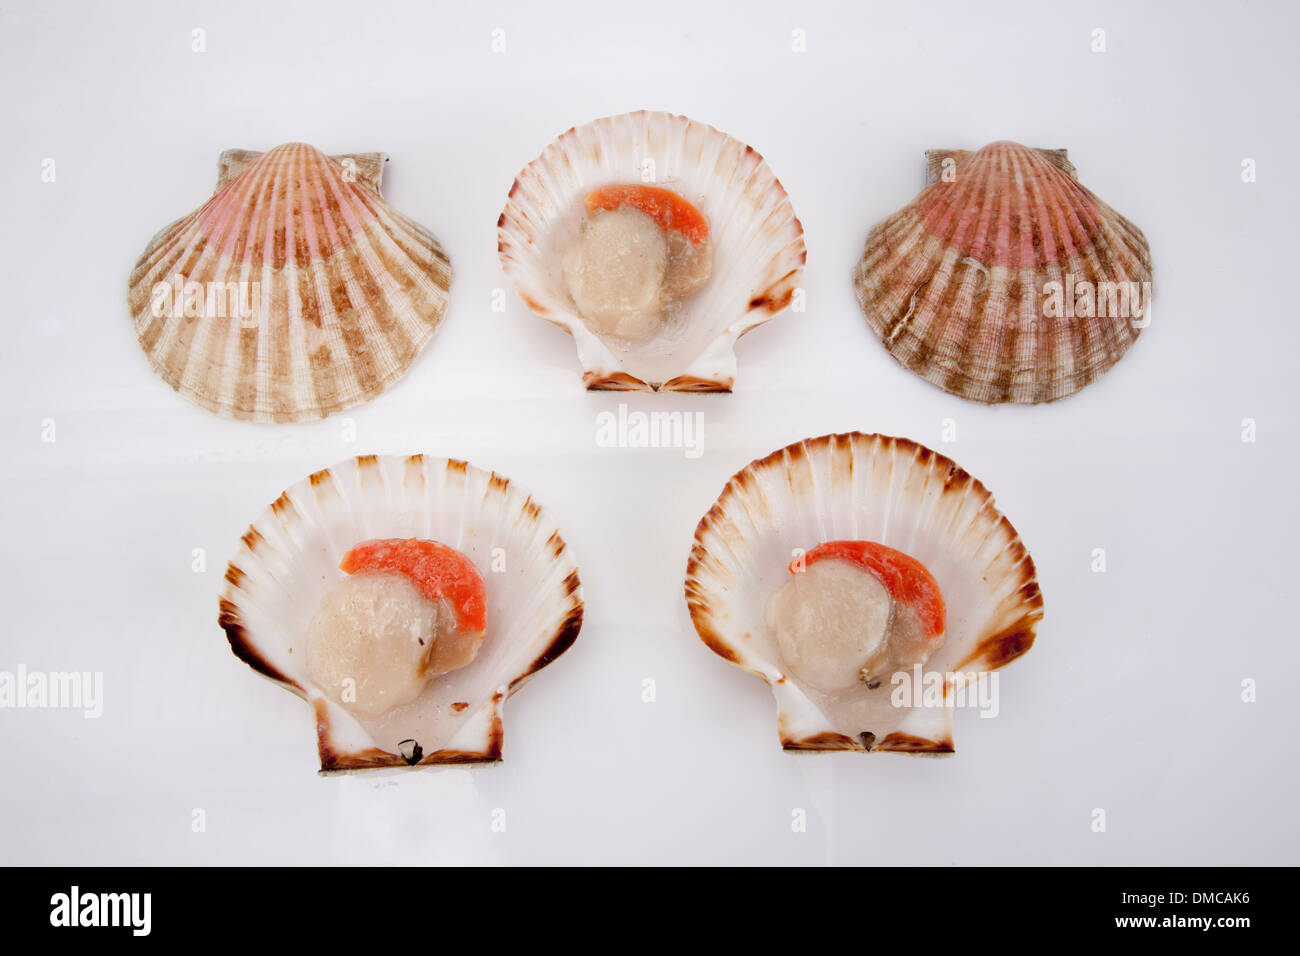 Clam shell raw food uncooked seafood eat product buy sell restaurants cuisine nutrition plate dish meal cooking chef variety art Stock Photo